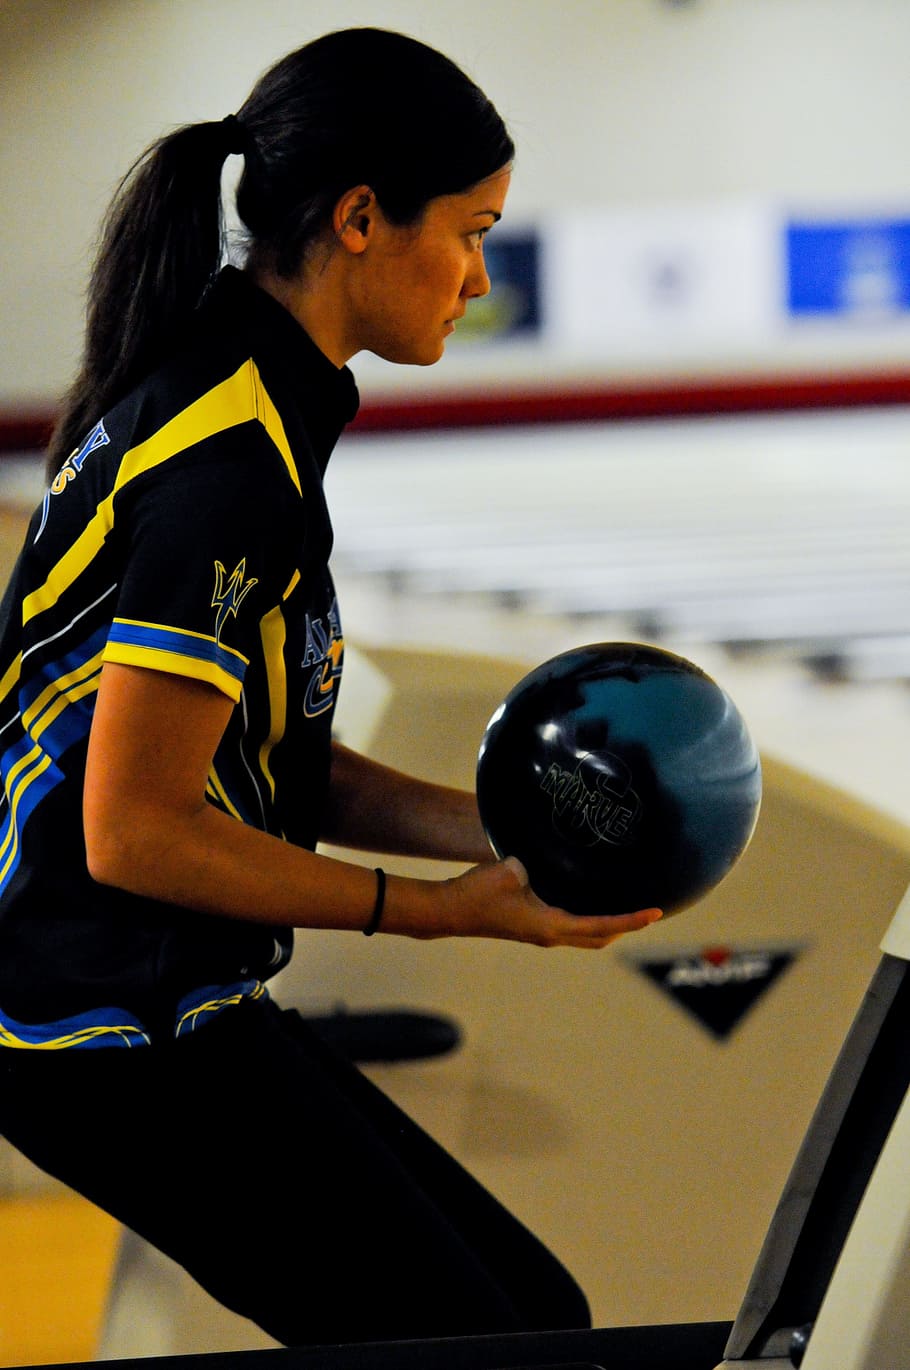 bowling, competition, sport, activity, thrill, alley, human, side view, skill, indoors